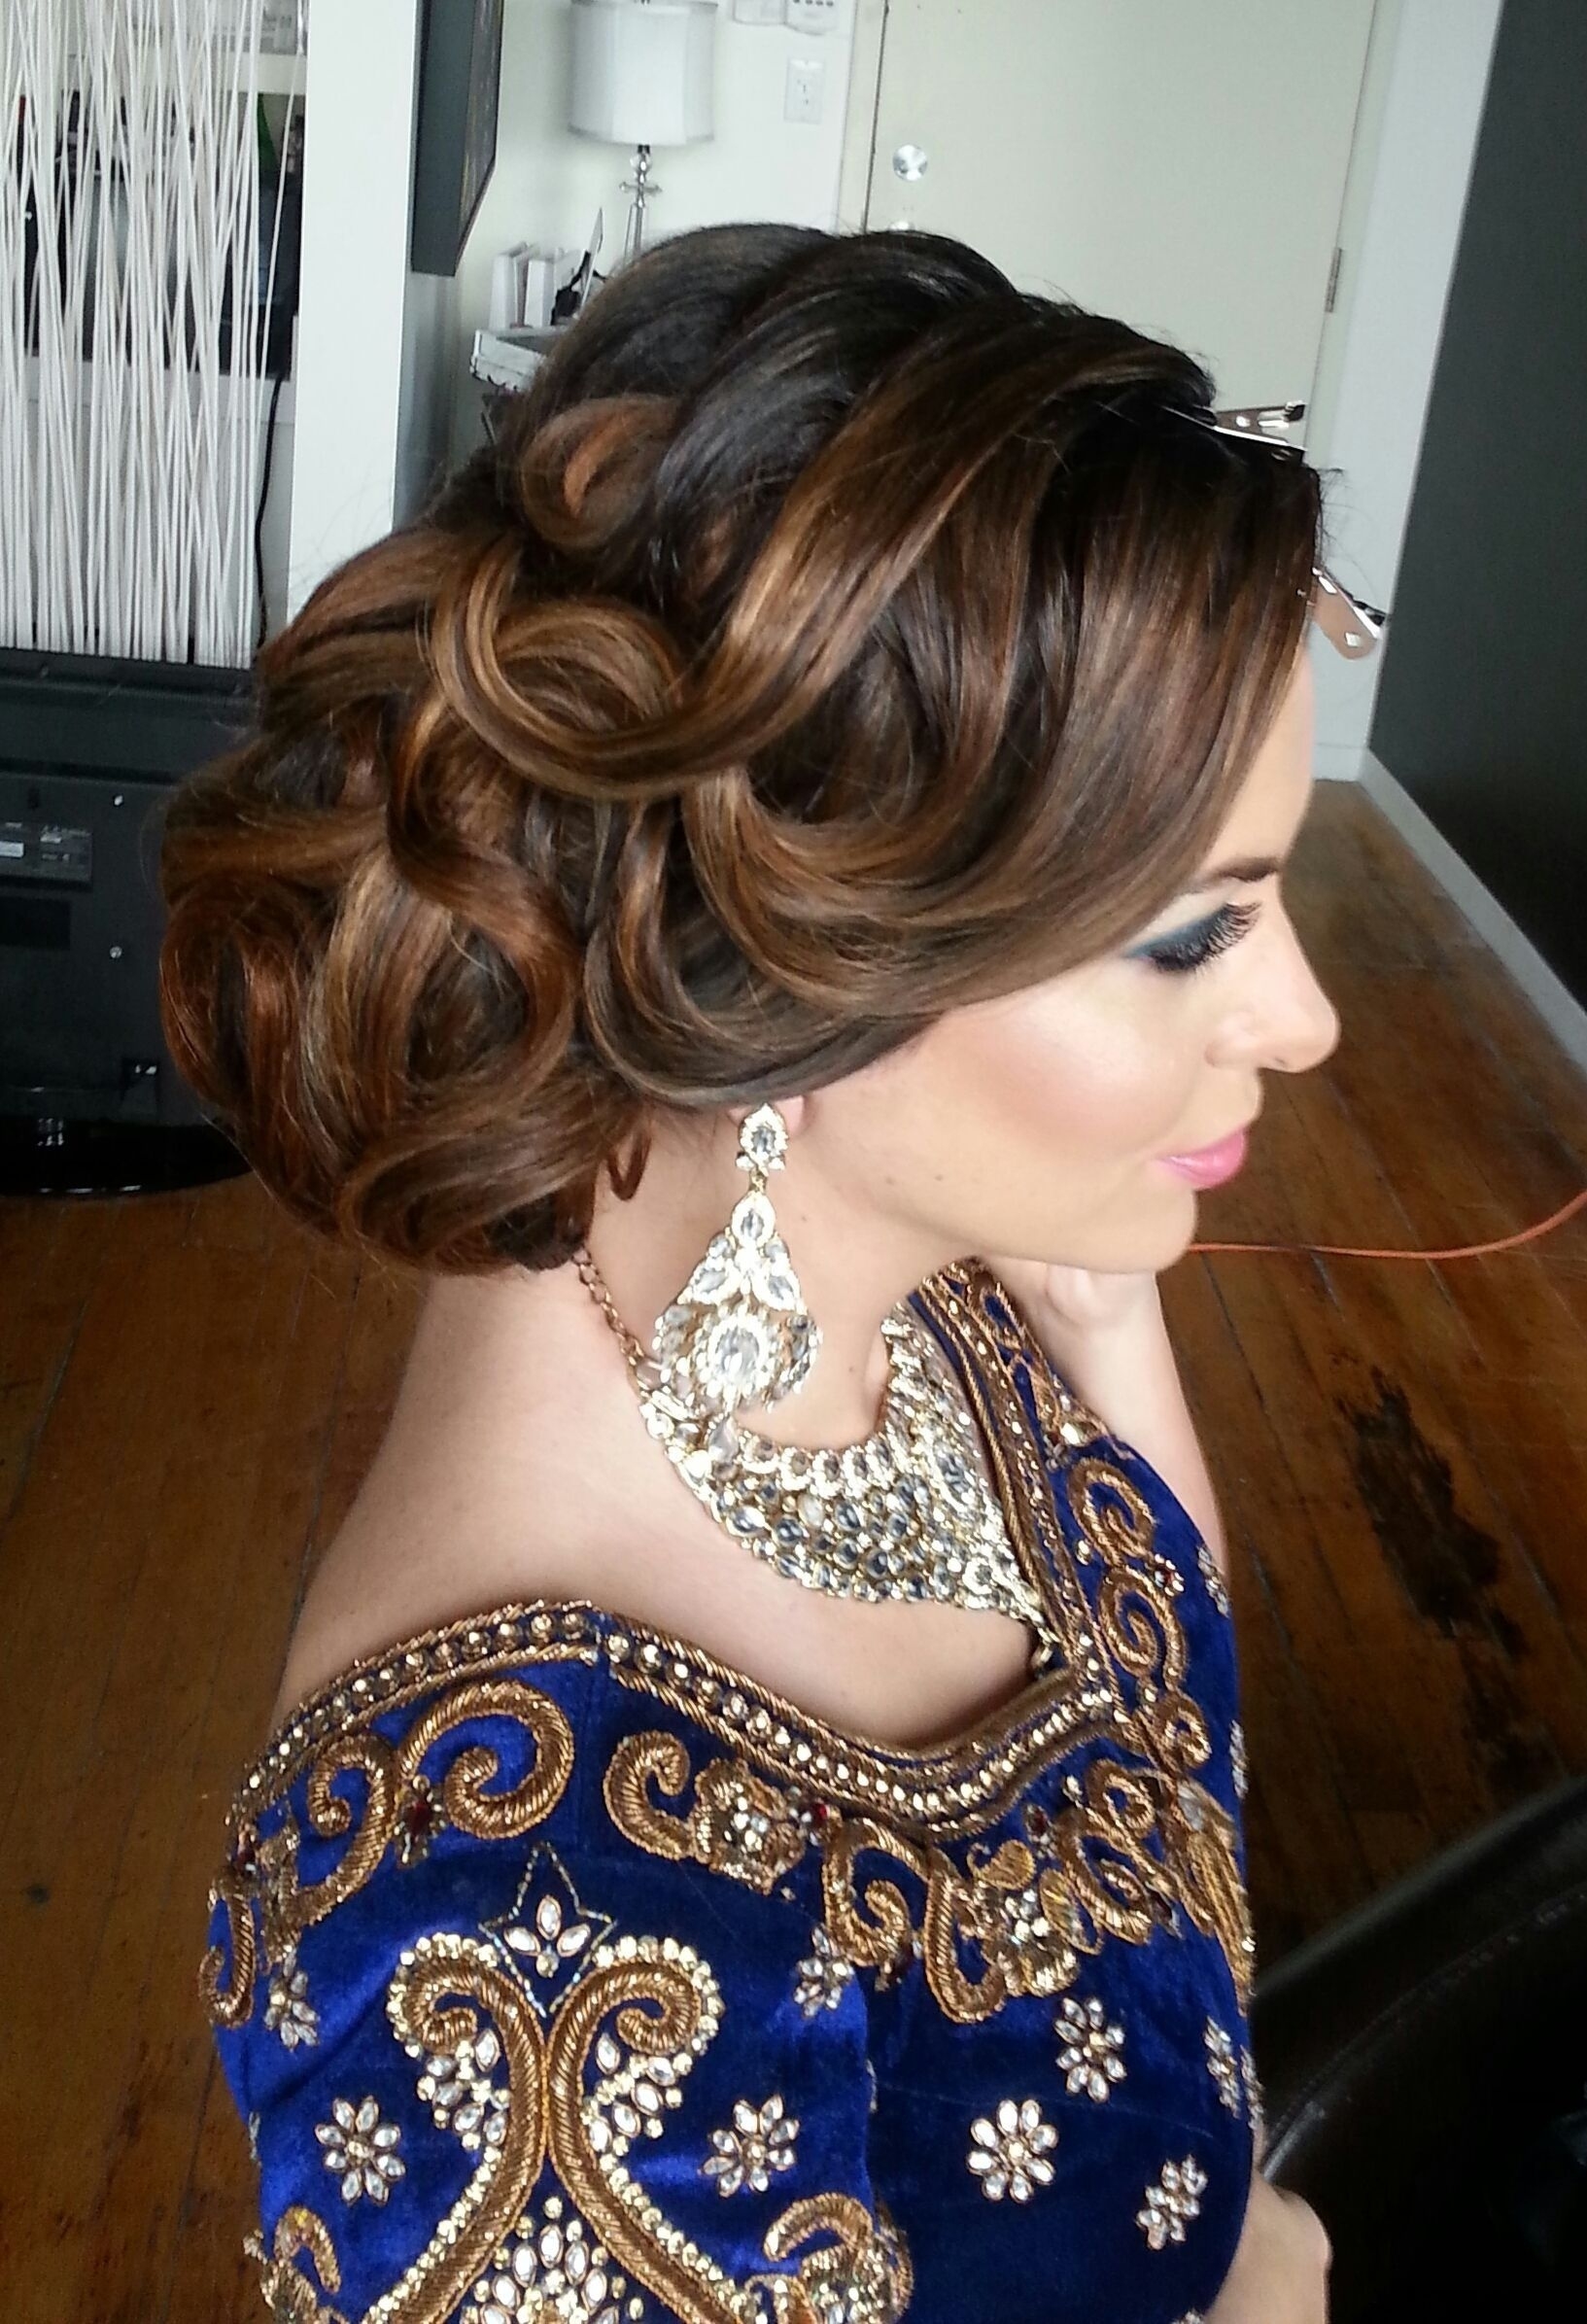 Most Stunning Indian Bridal Hairstyle Updo Pics | Wedding regarding Indian Bridal Hairstyle Updo